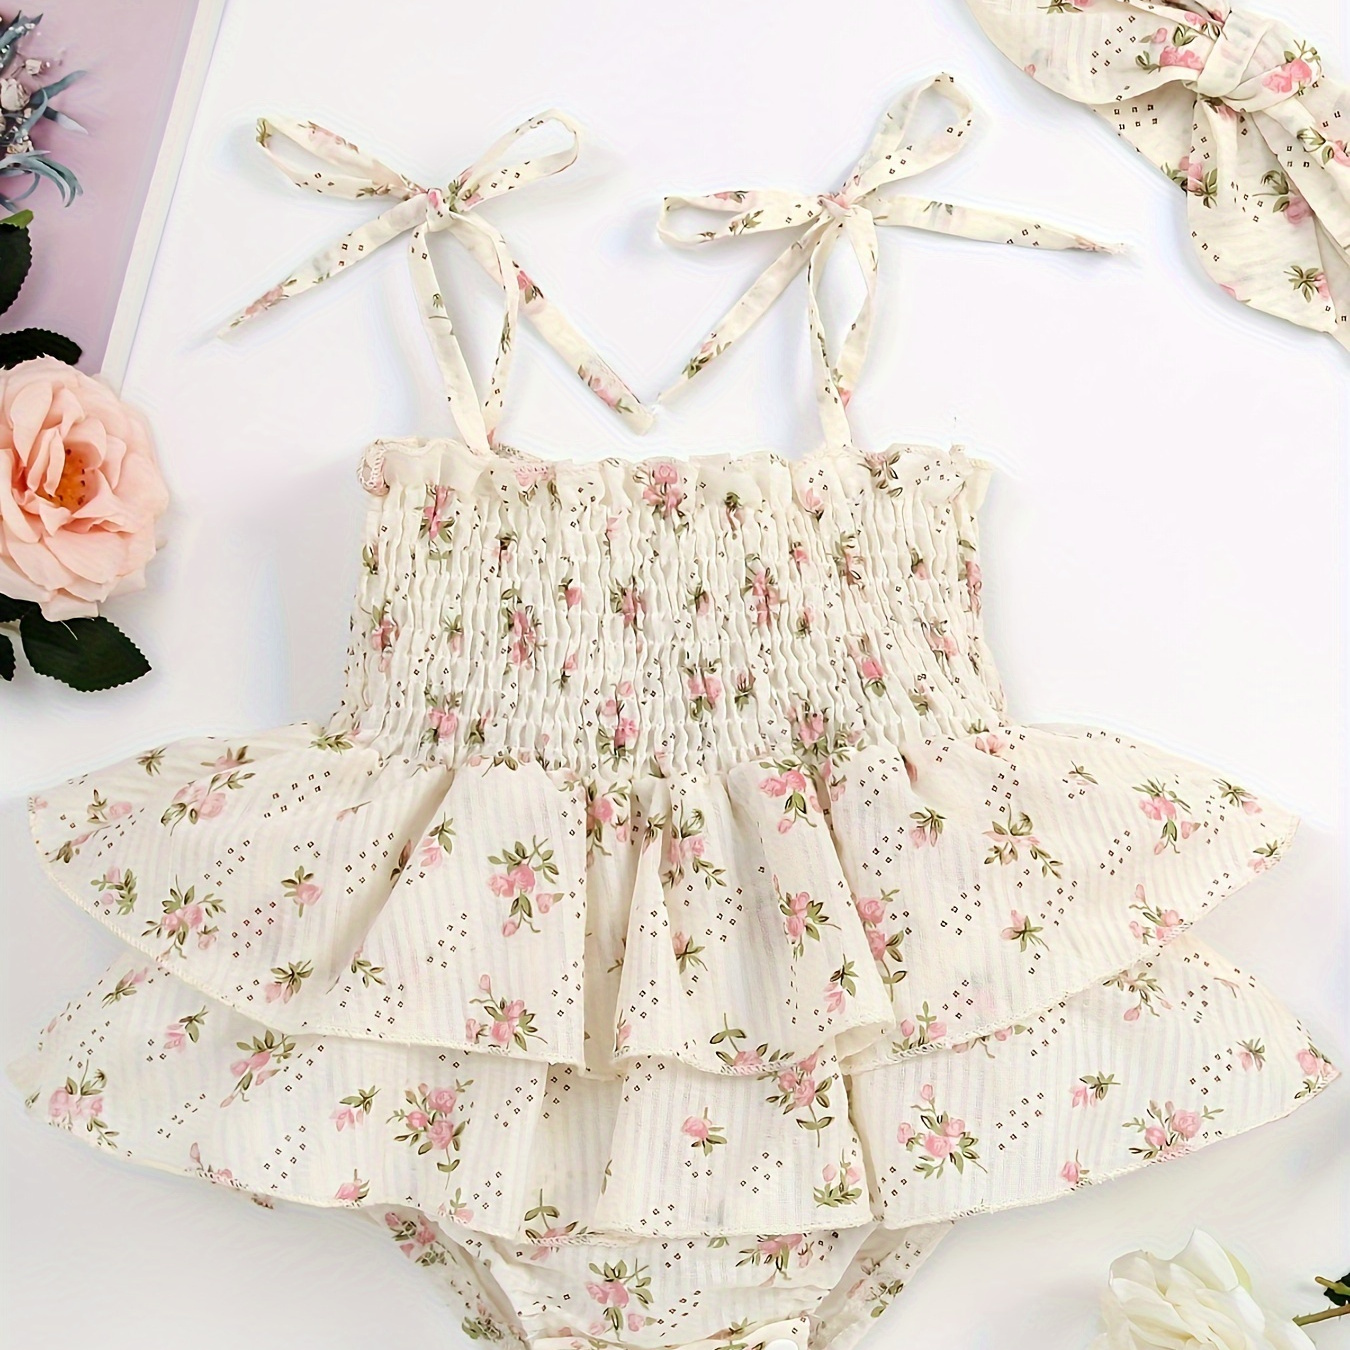 

Baby Girl Summer Fashion Jumpsuit Set Floral Elasticated Bust Sleeveless Romper With Bow Headband